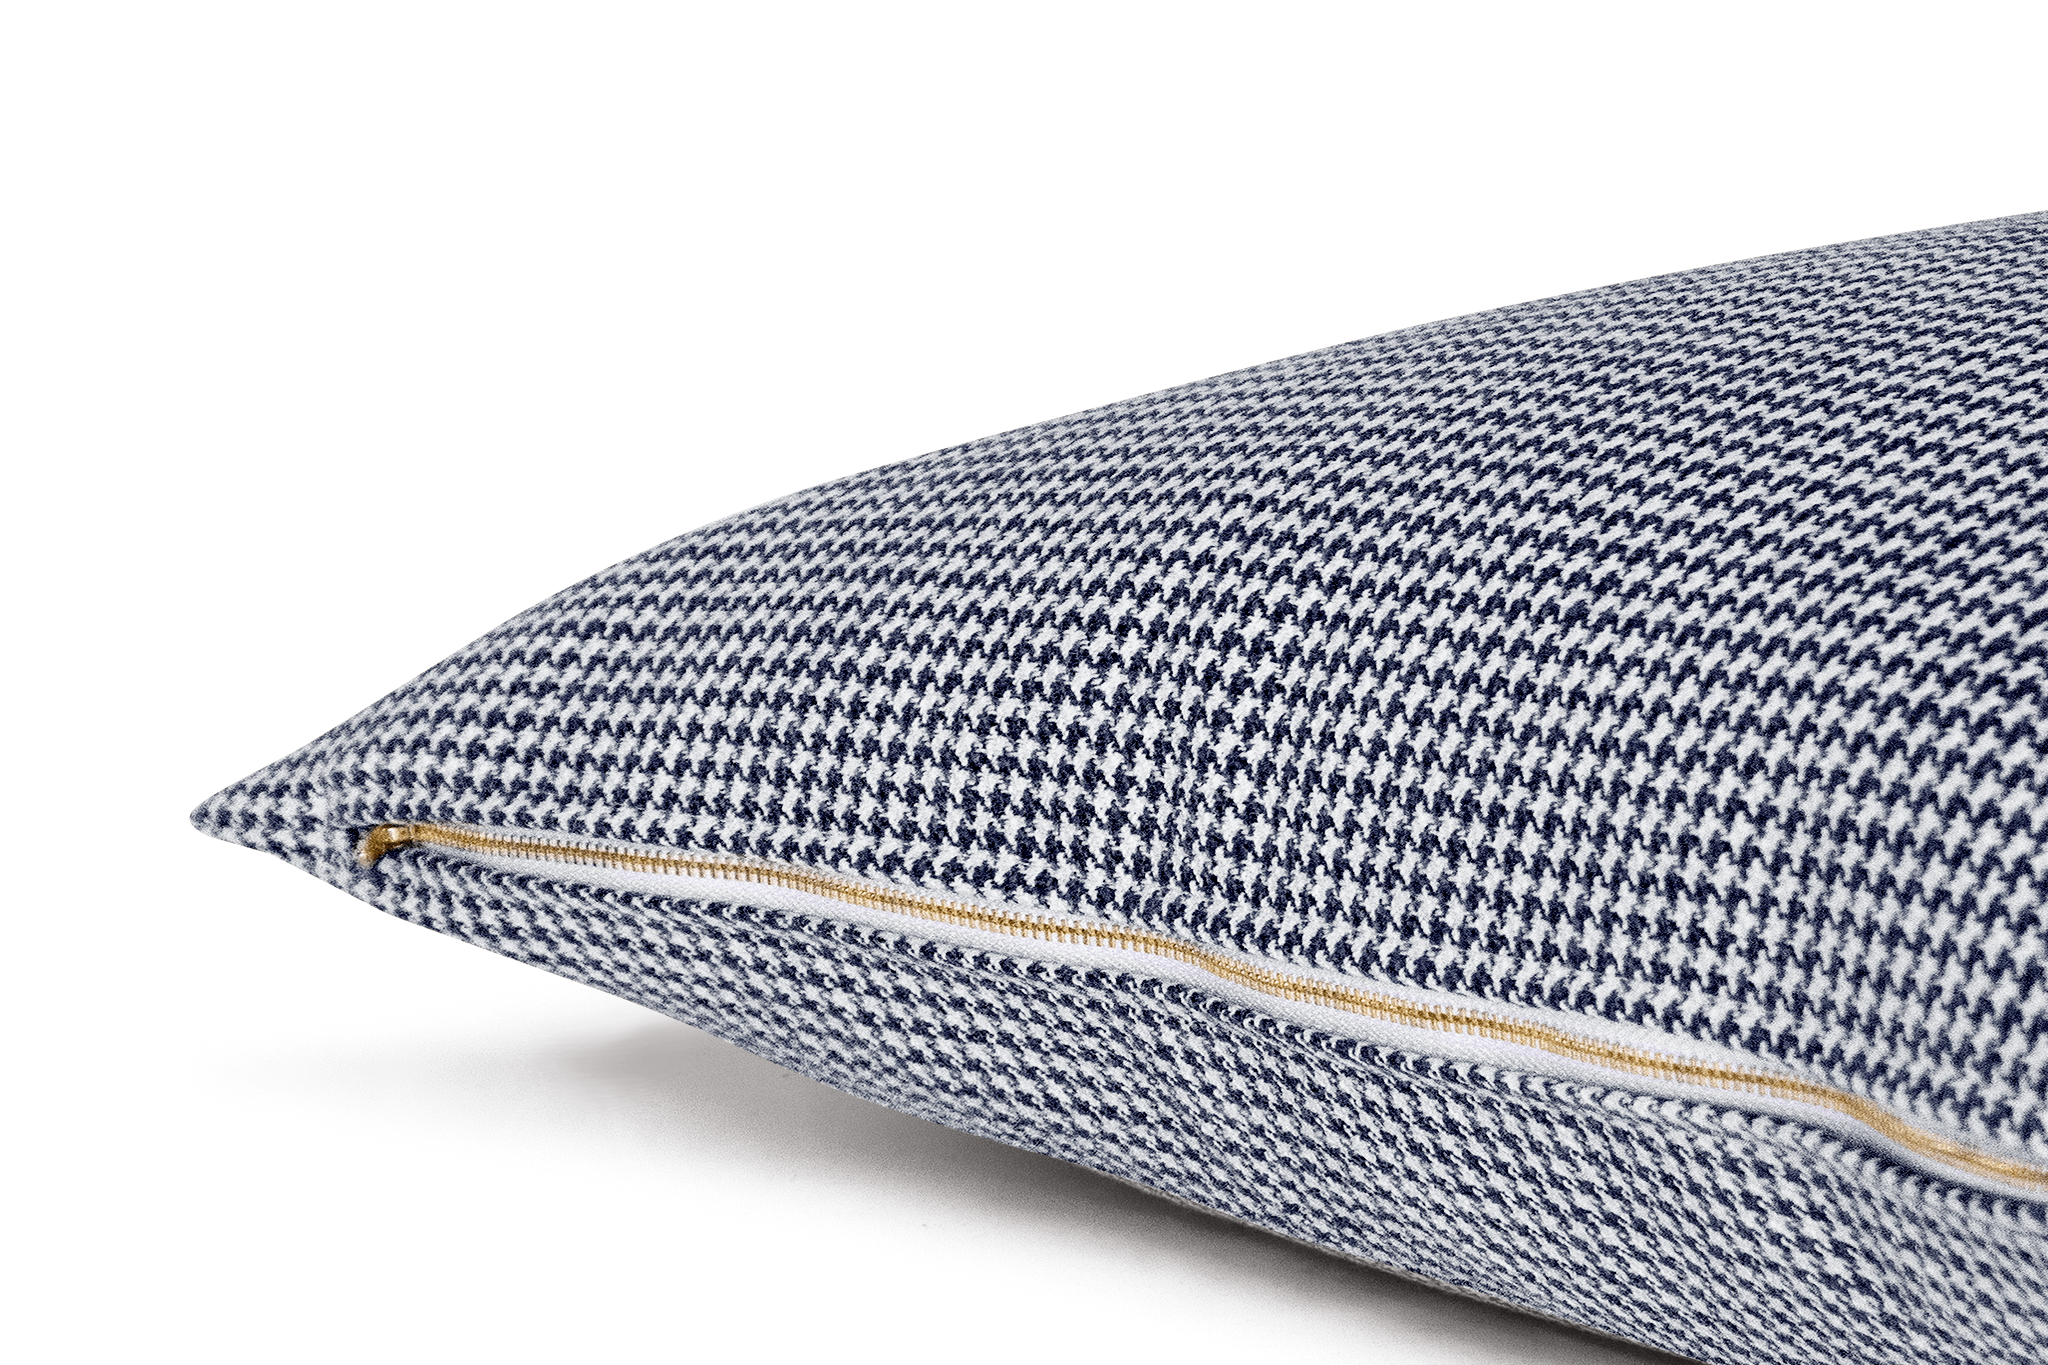 Indigo Houndstooth Cushion Cover Cushion Cover Canadian Down & Feather Company 